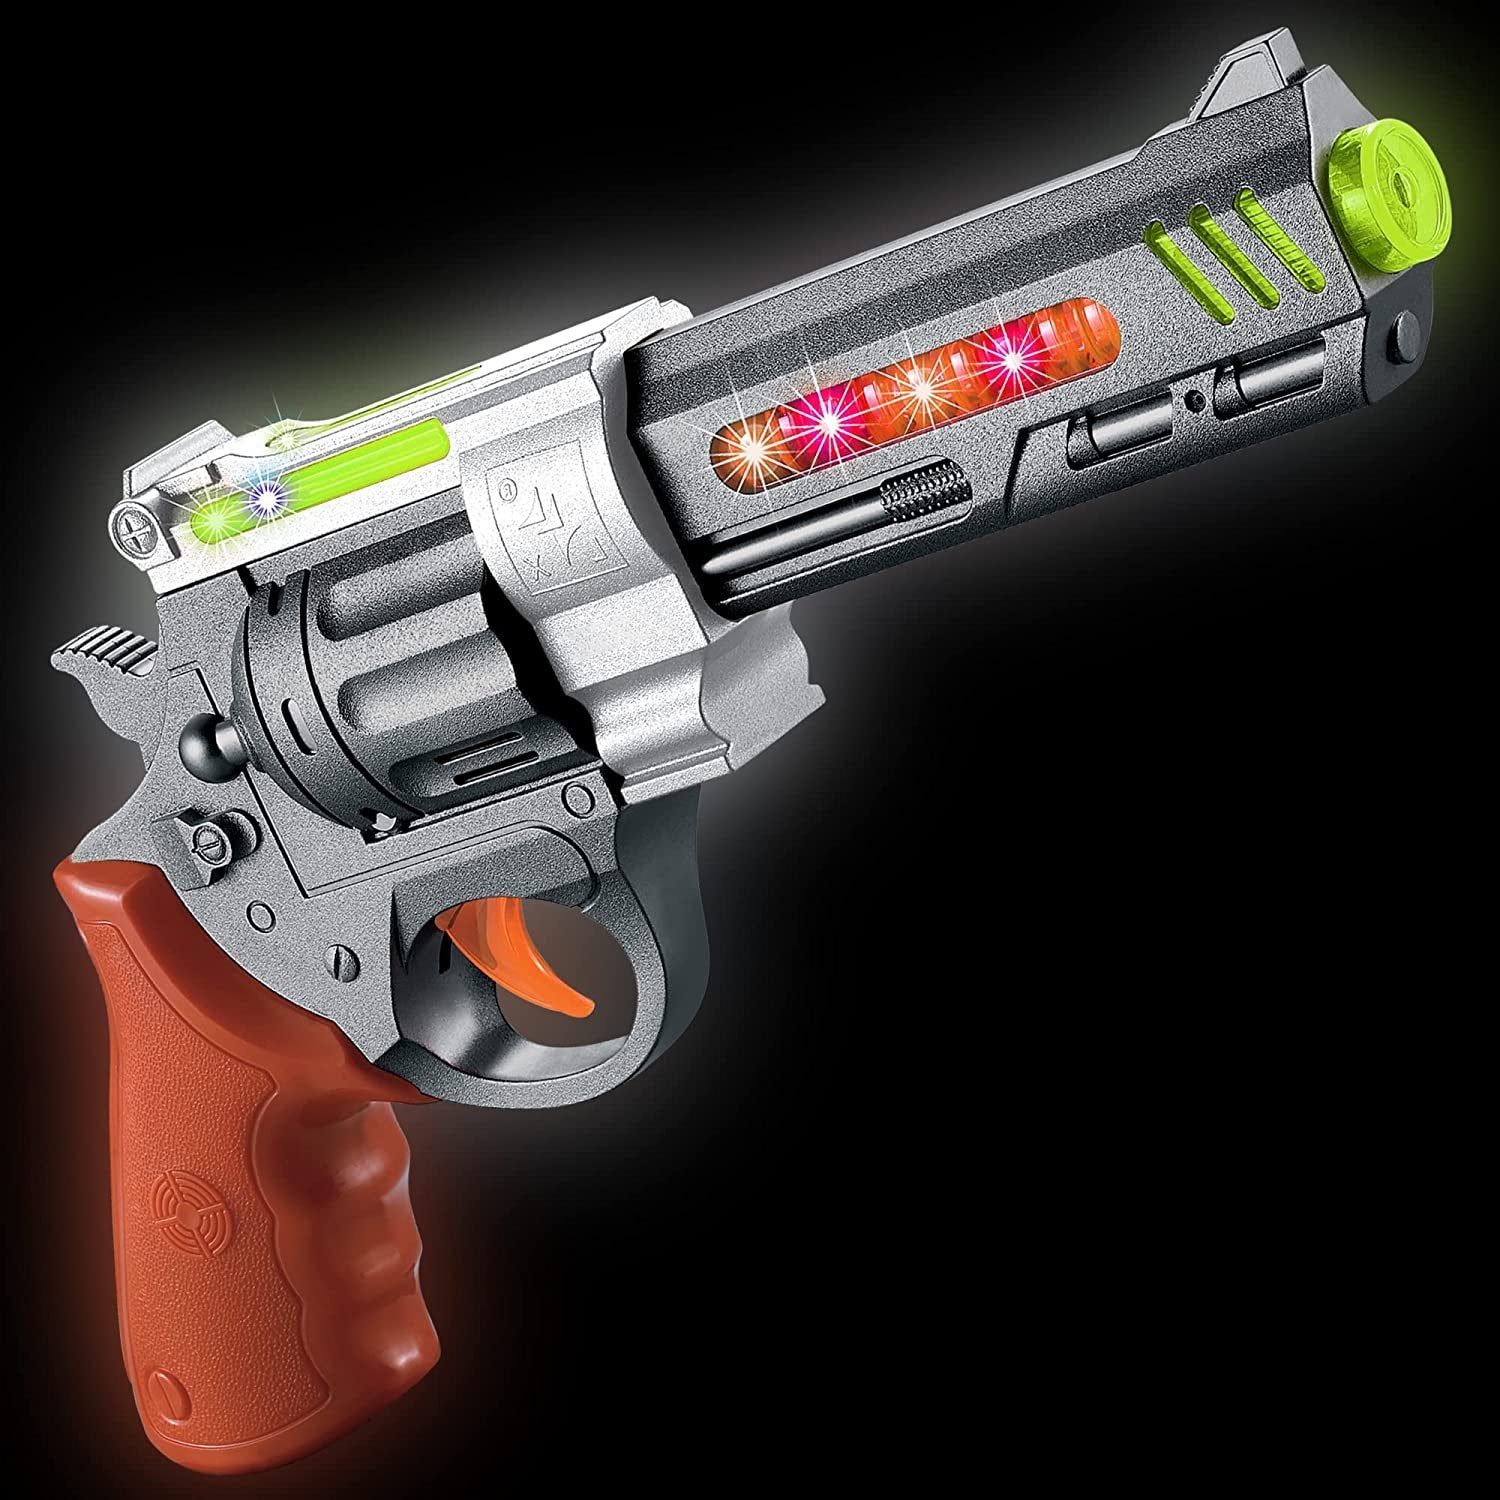 Pistol Style Play Gun with Lights and Sound, 12" Revolver with Cool LED Effects and Realistic Firing Sounds, Great Birthday Gift for Kids - Batteries Not Included